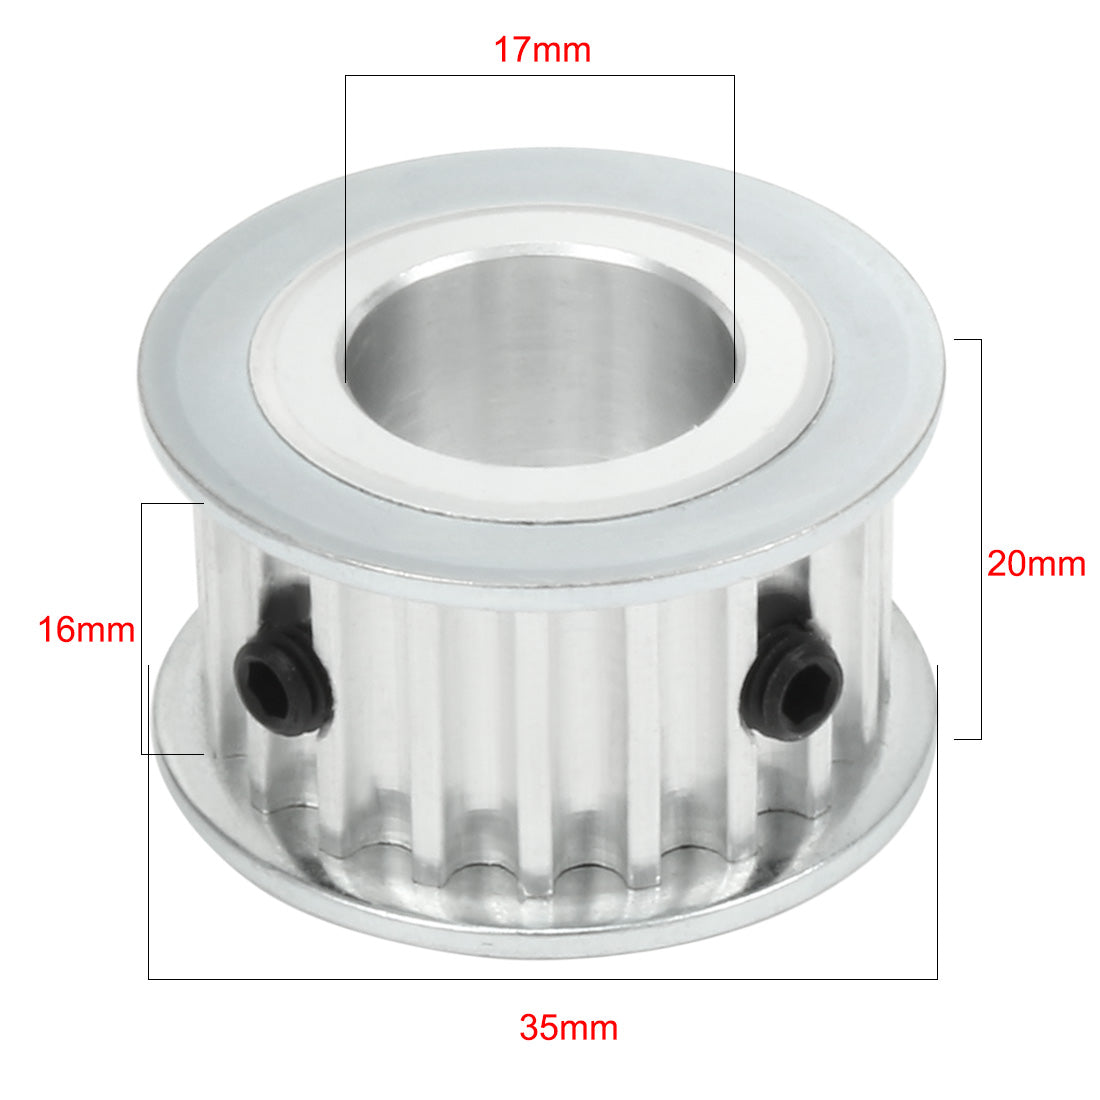 uxcell Uxcell Aluminum 20 Teeth 17mm Bore 5mm Pitch Timing Belt Pulley for 15mm Belt